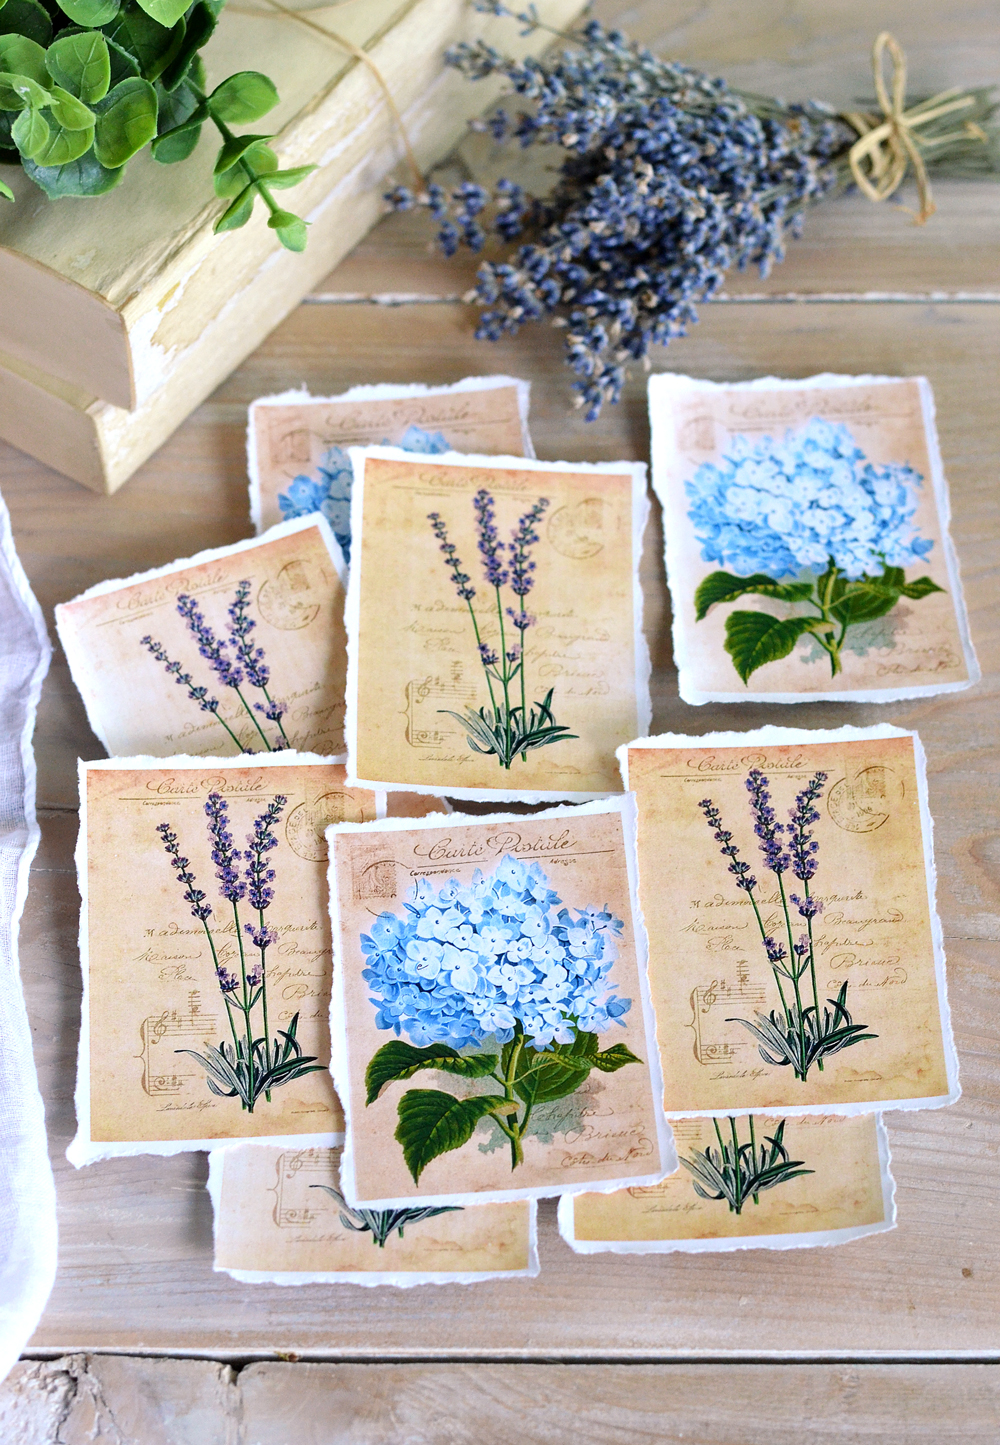 Hydrangea and Lavender vintage tags with torn edges - by Dreams Factory #diy #crafts #French #lavender #hydrangeas